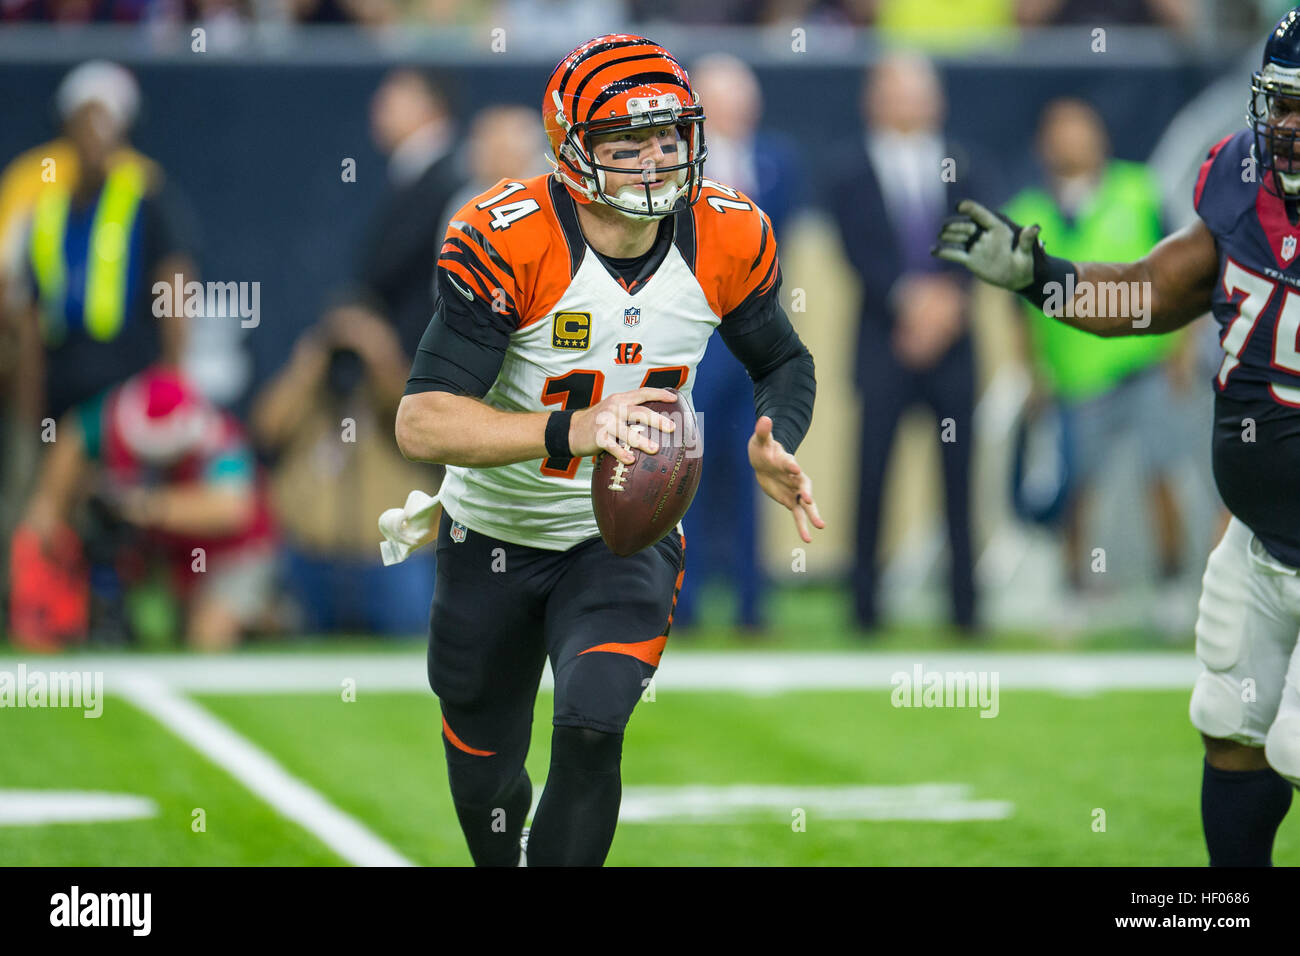 Houston, Texas, USA. 24th Dec, 2016. Cincinnati Bengals quarterback Andy Dalton (14) scrambles during the 1st quarter of an NFL game between the Houston Texans and the Cincinnati Bengals at NRG Stadium in Houston, TX on December 24th, 2016. © Trask Smith/ZUMA Wire/Alamy Live News Stock Photo